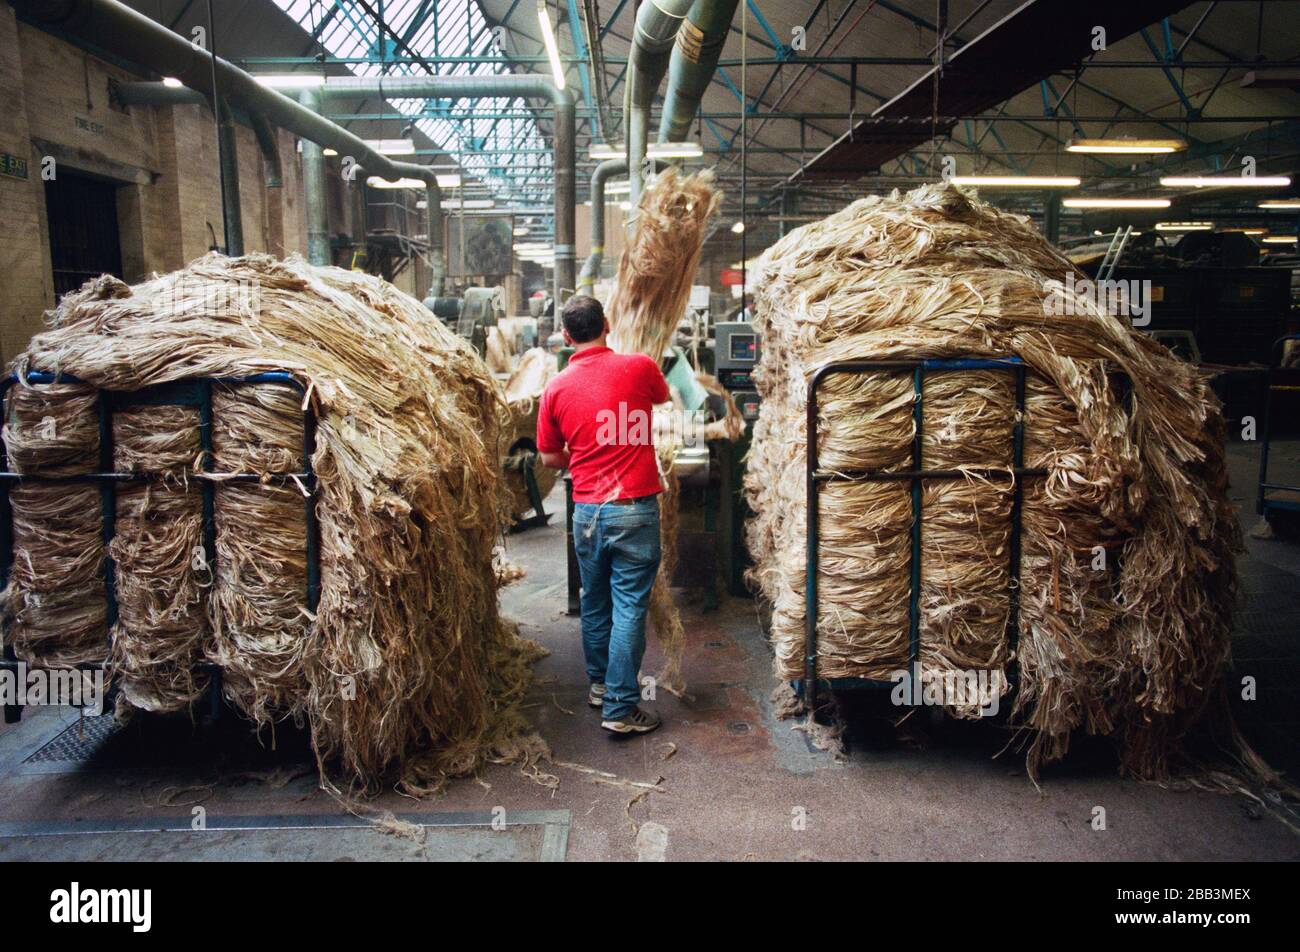 A worker loading unprocessed jute into a machine at Tay Spinners mill in Dundee, Scotland. This factory was the last jute spinning mill in Europe when it closed for the final time in 1998. The city of Dundee had been famous throughout history for the three 'Js' - jute, jam and journalism. Stock Photo